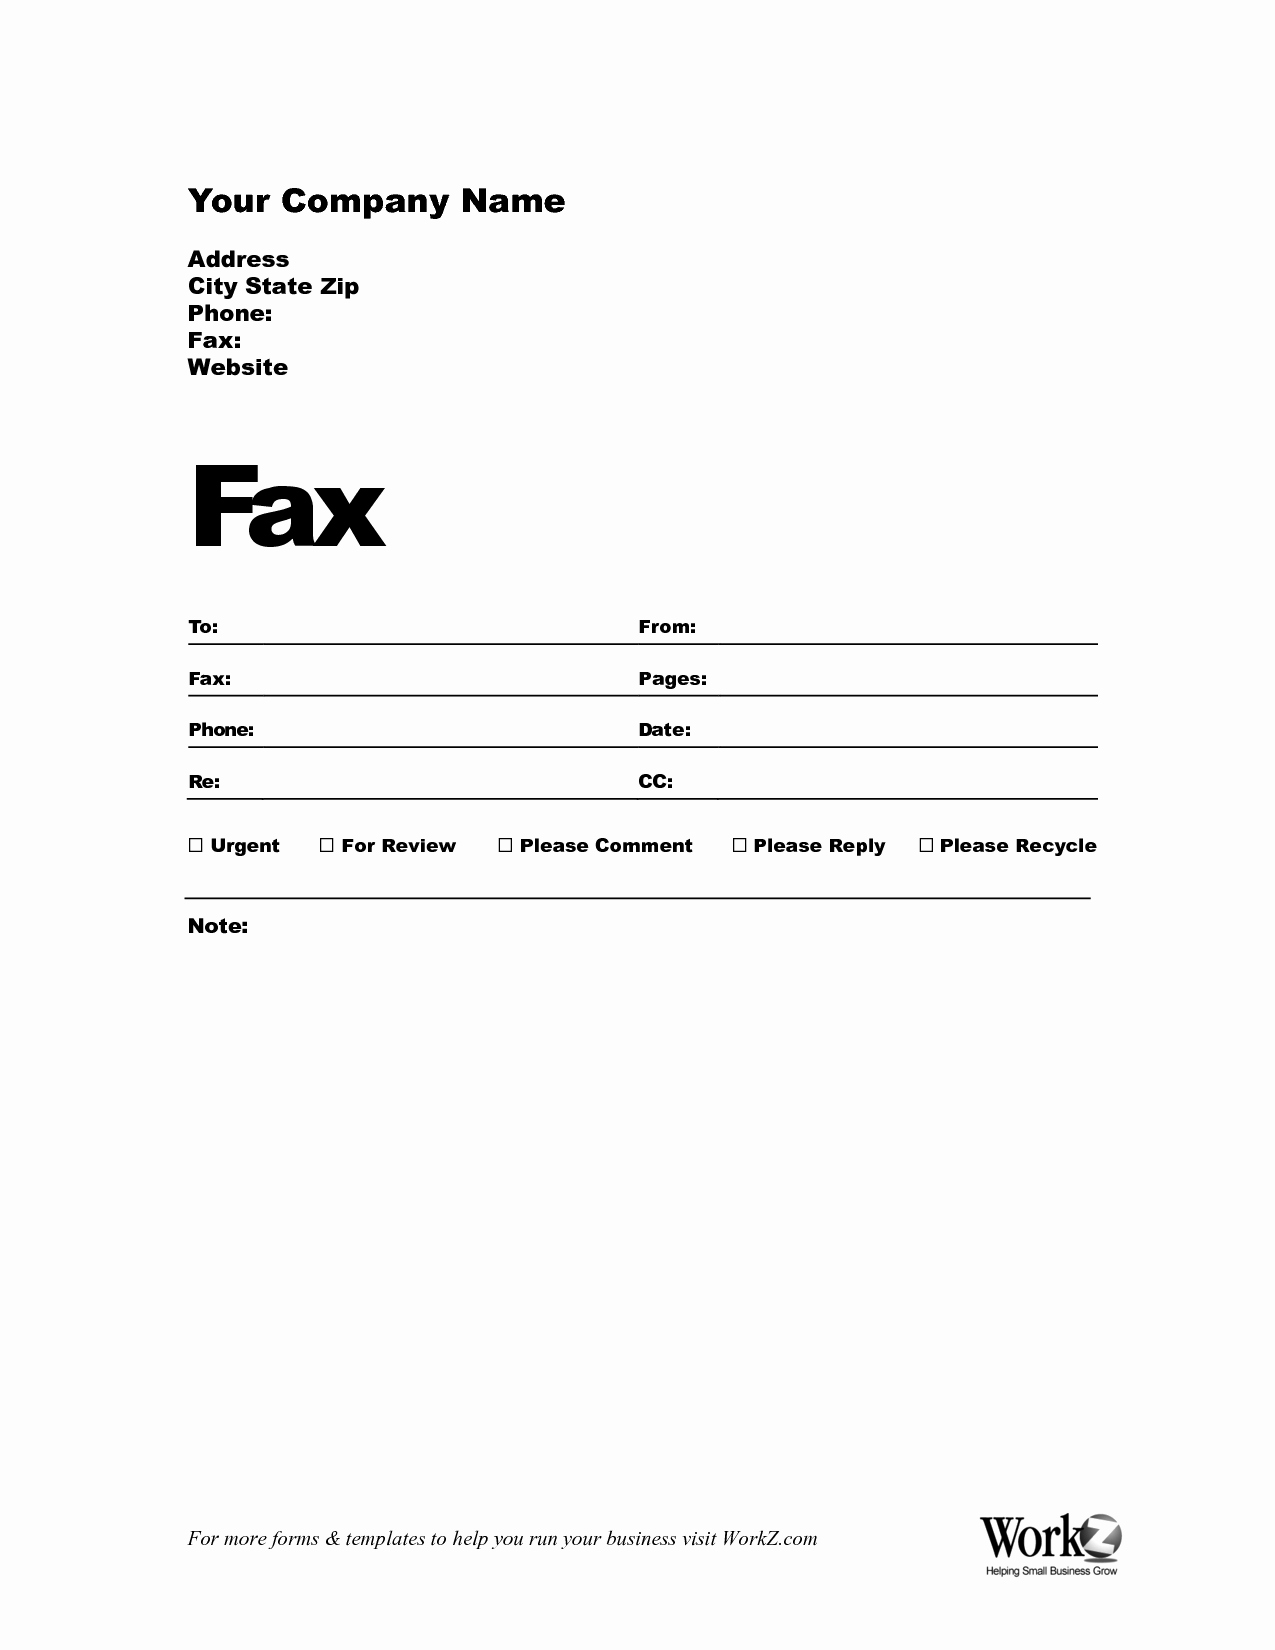 free fax cover sheet template